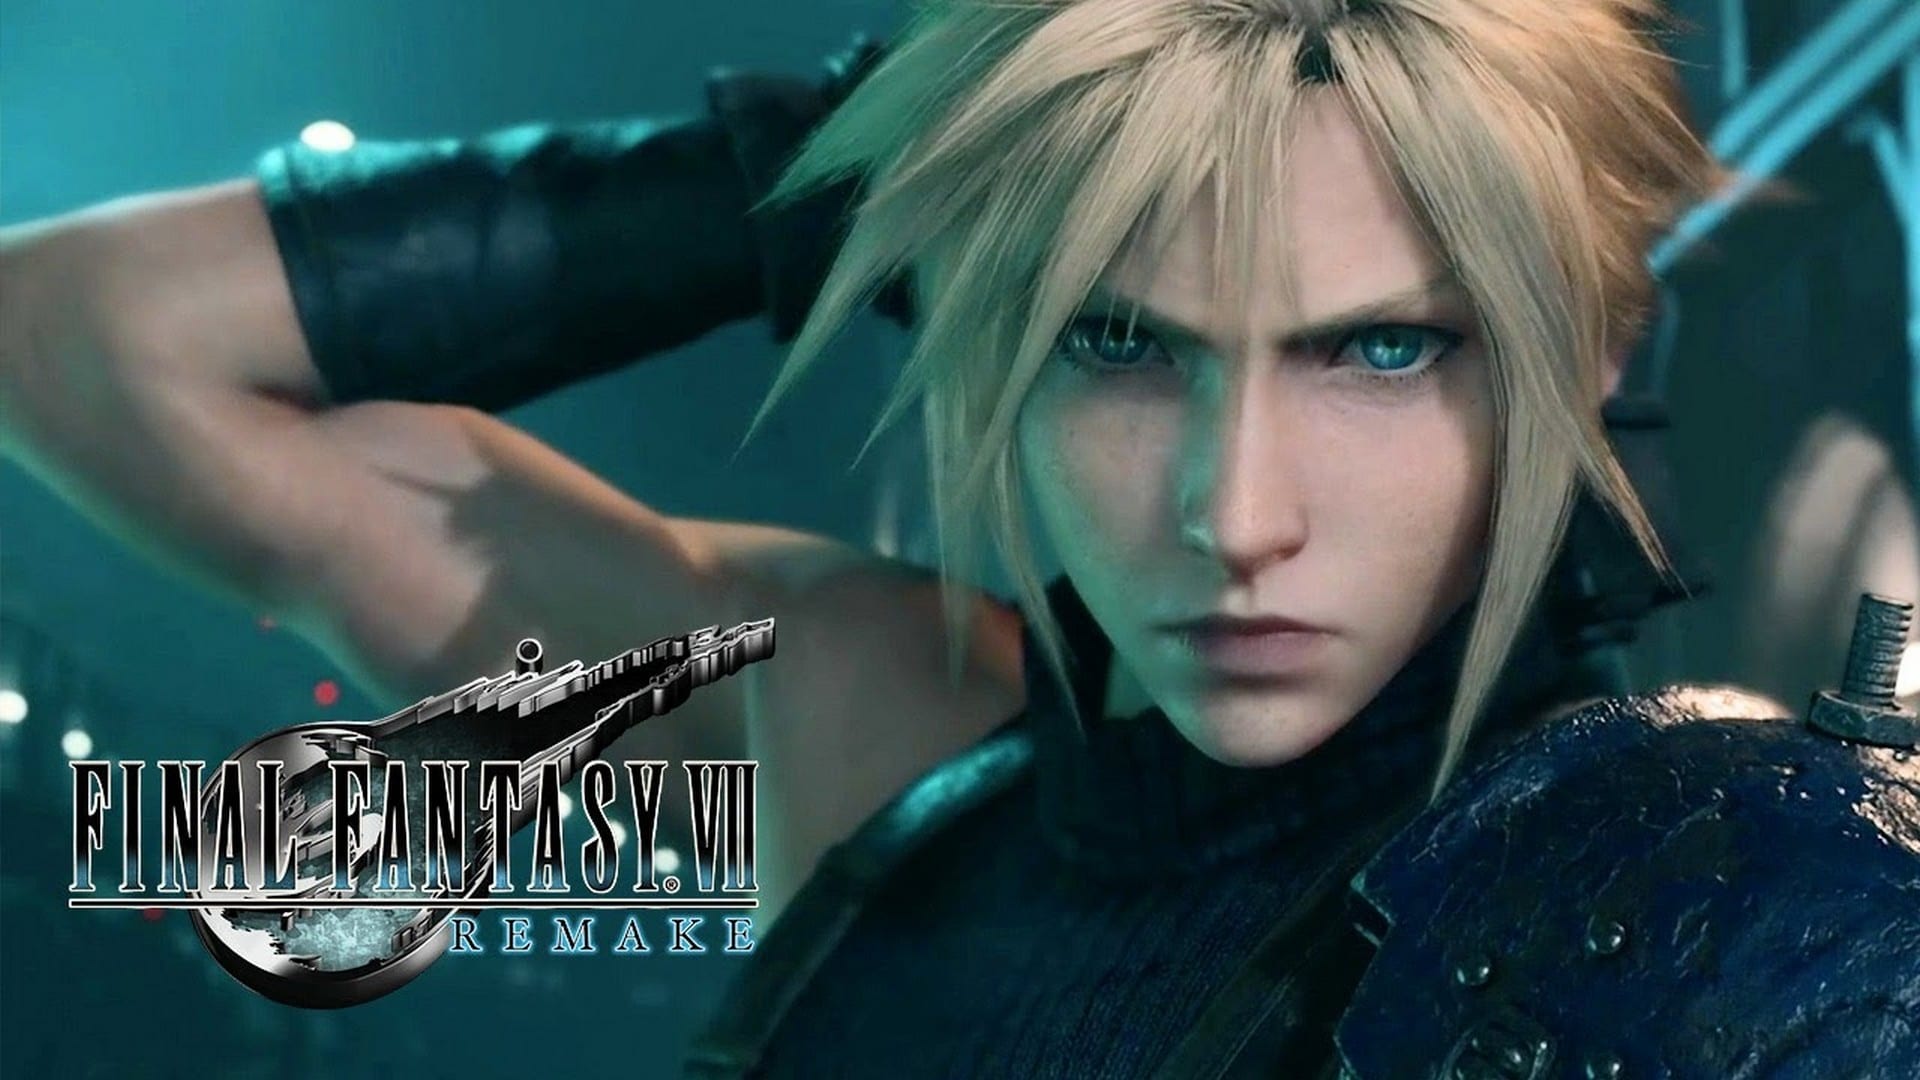 Final Fantasy Vii Remake Playable Demo Now Available On Playstation 4